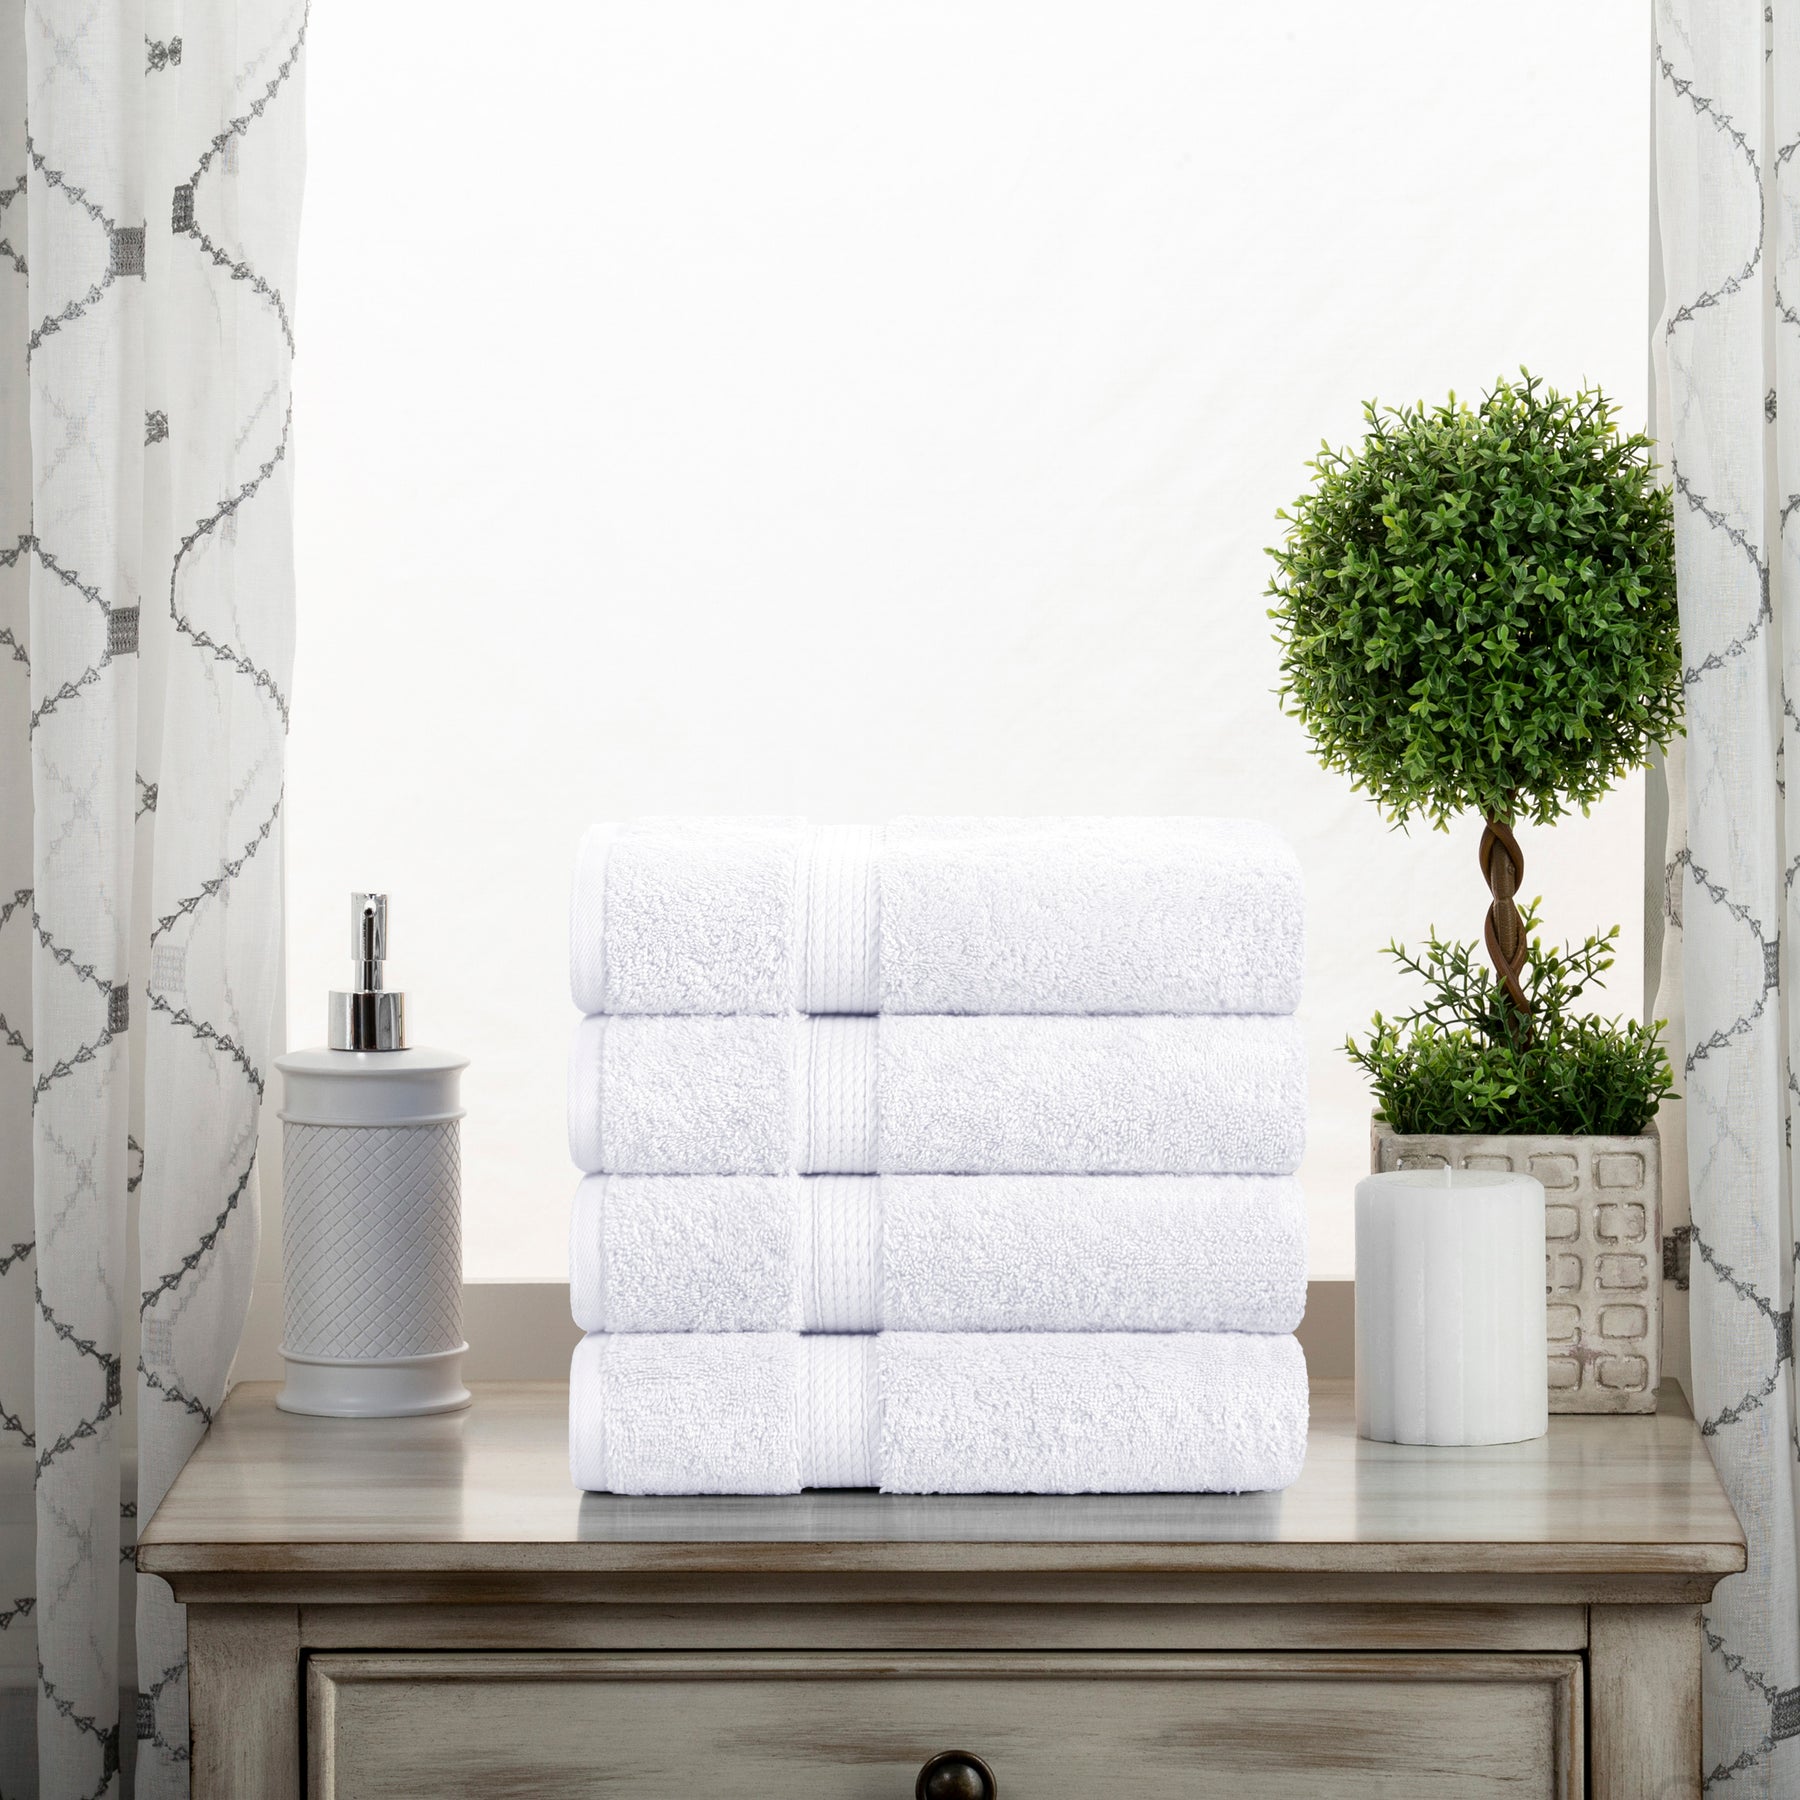 Solid Egyptian Cotton 4 Piece Hand Towel Set - White